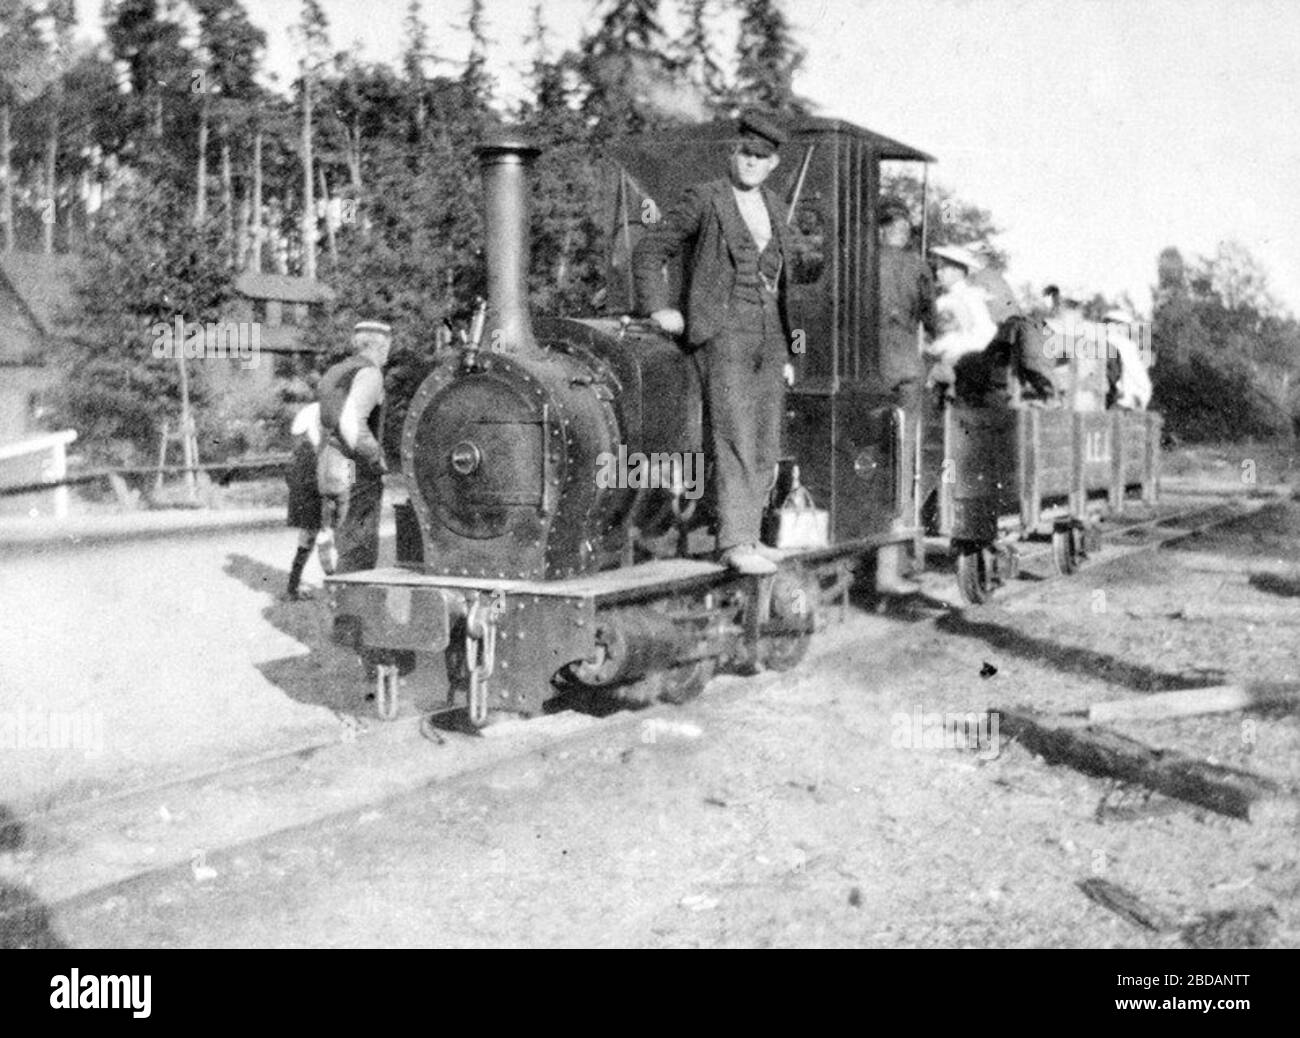 'English: 2 ft narrow gauge Black Hawthorn locomotive No 475 'LILLY' built in 1879 of the Boeylestaad copper mine railway near Arendal in south Norway, which closed down in 1877. Their 2 ft narrow gauge Black Hawthorn locomotive No 475 'LILLY' was built in 1879 . When the mine closed in 1877,'LILLY' was stored in Kristiania (Oslo) for some years before it was sold to Sweden and the Netrabybanan (NAEJ) in far south Sweden, where it worked with maintaining the line. This photo was taken at NAEJ in Sweden. Subsequently, 'LILLY' was sold to the governmental construction company Vattenfall, where i Stock Photo